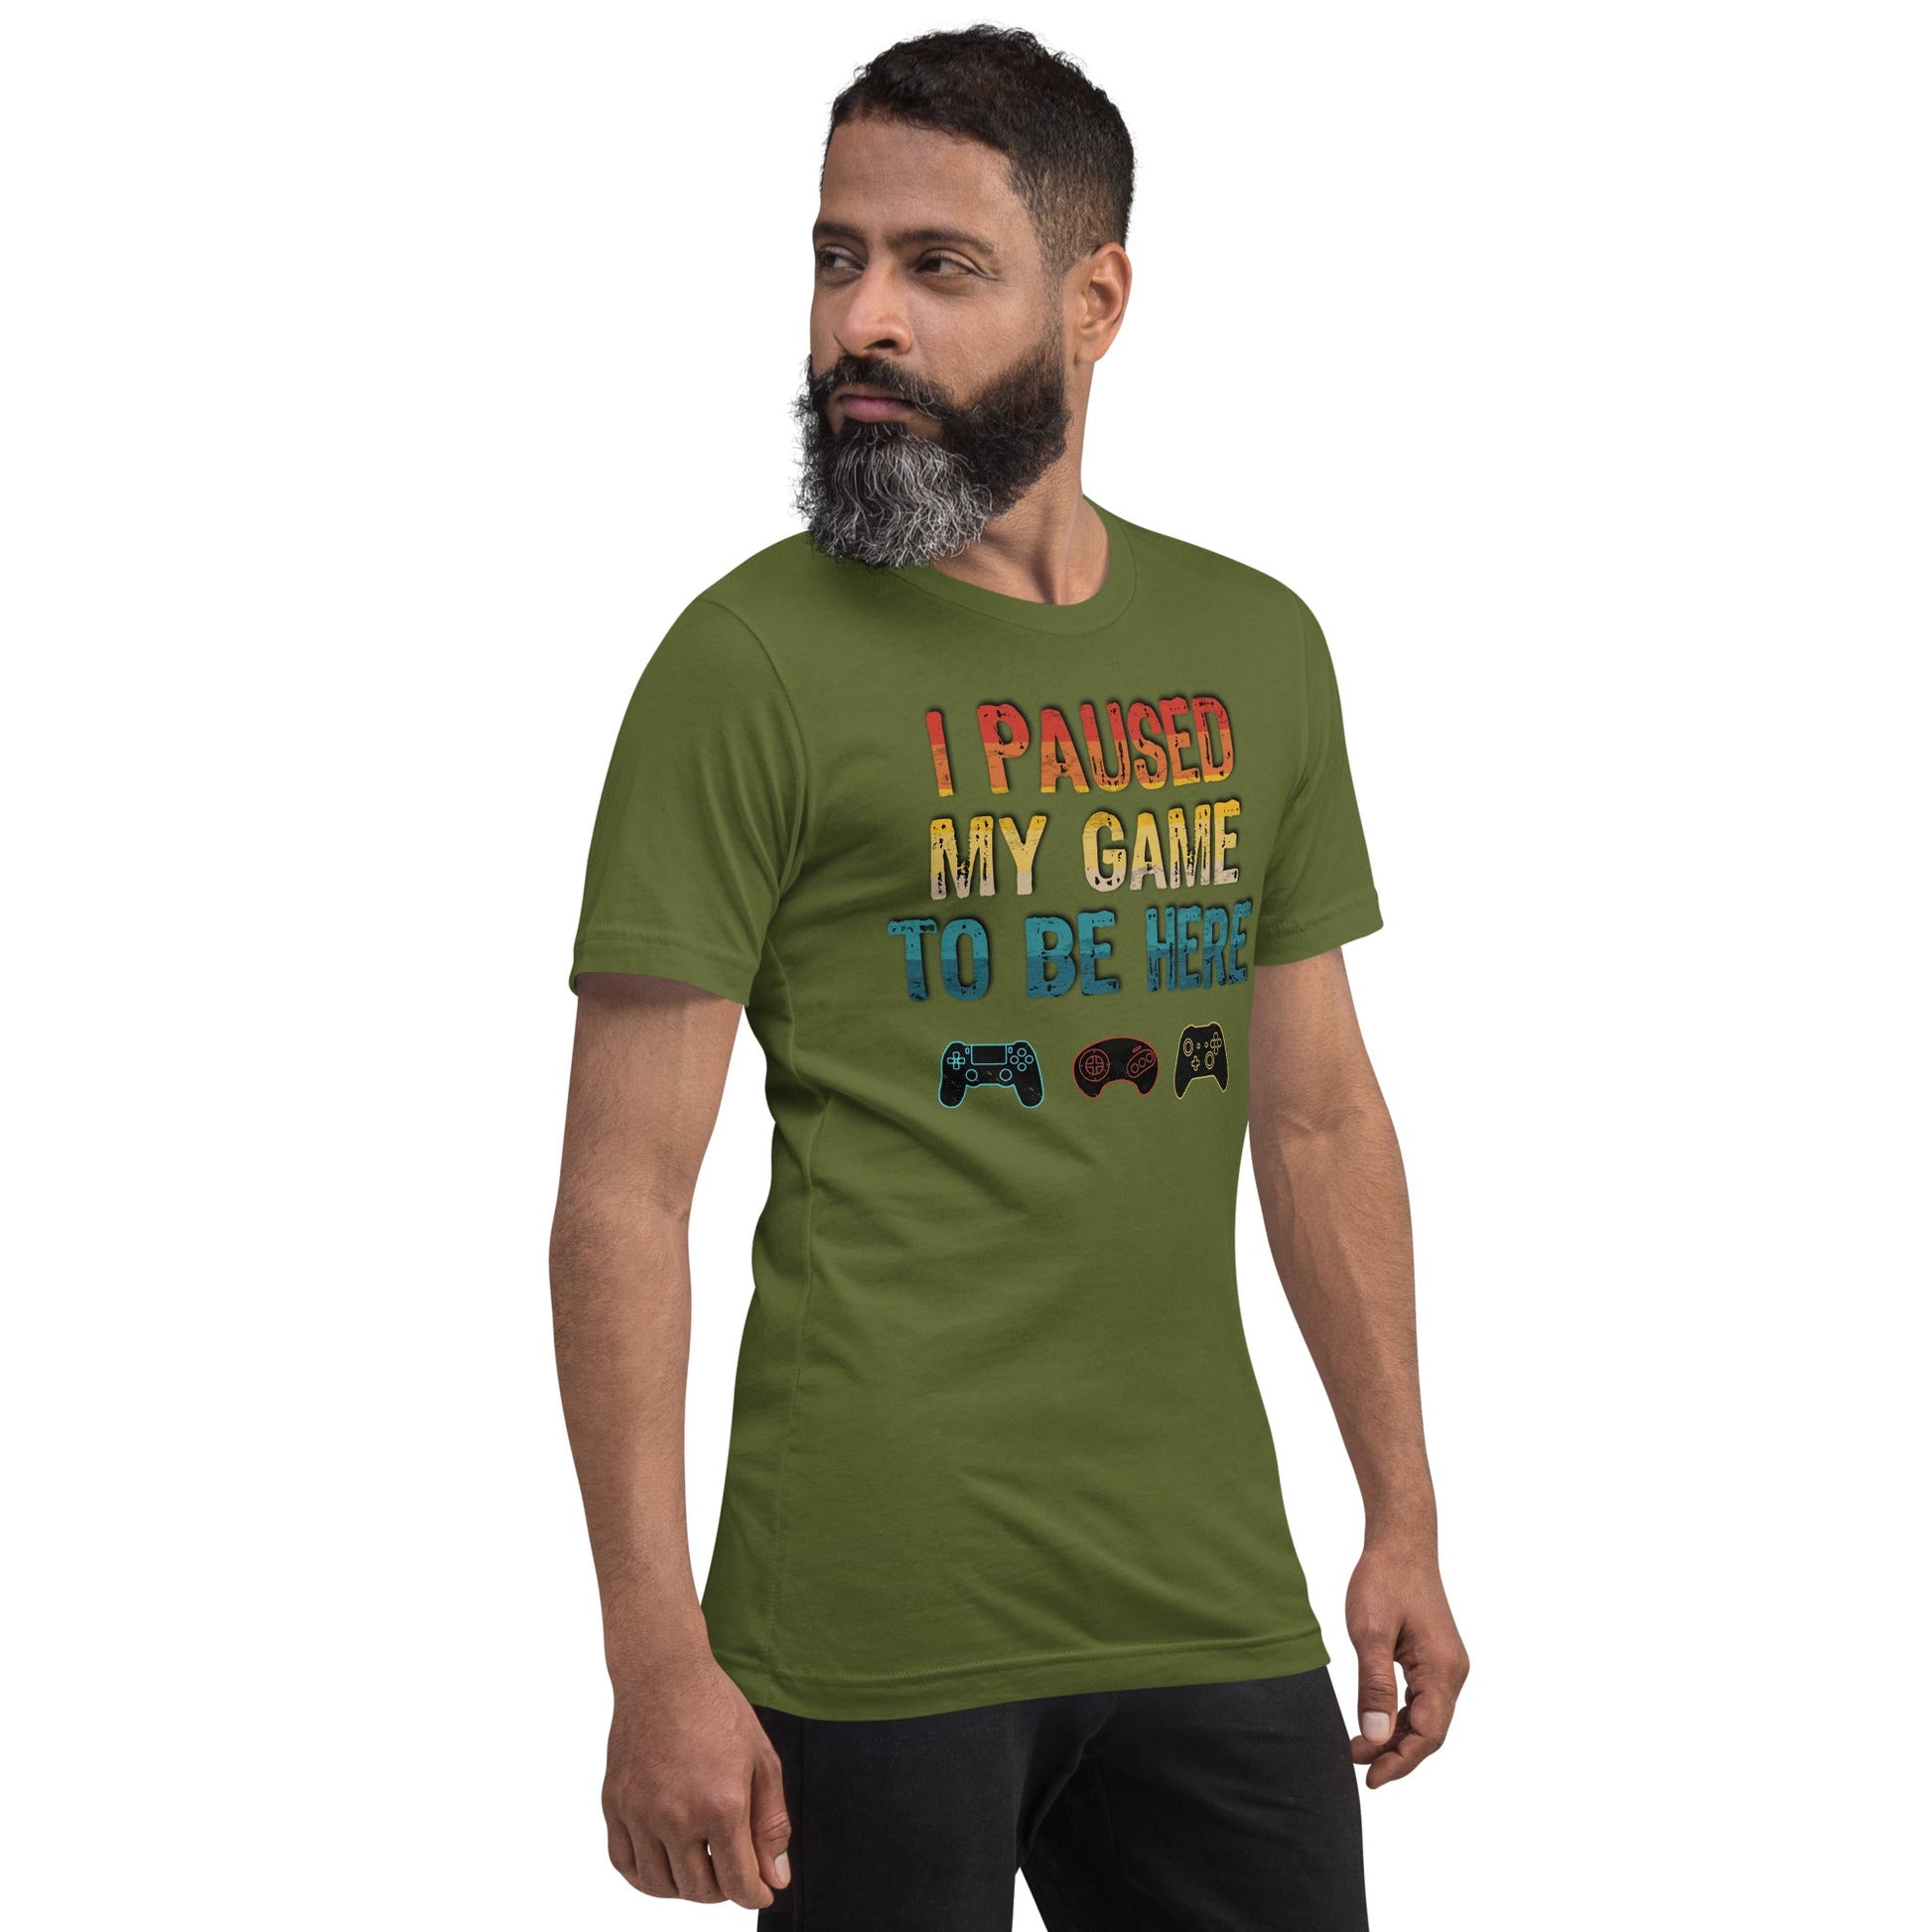 Scar Design T shirt I paused my game to be here T-shirt